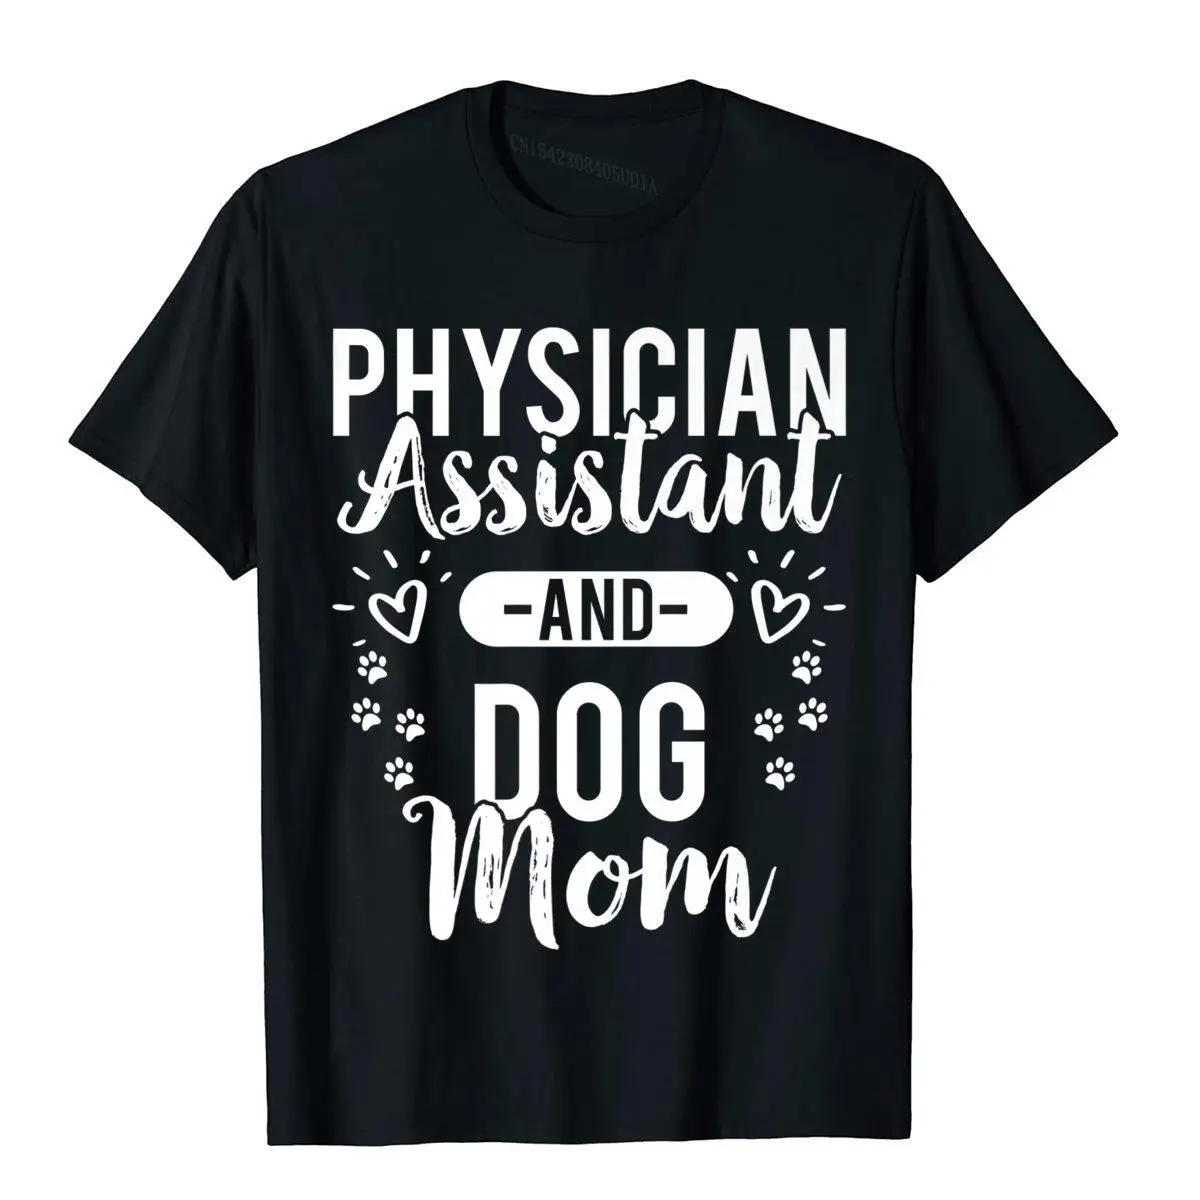 

Physician Assistant Shirt Physician Assistant And Dog Mom Premium T-Shirt Customized Tops Shirt Cotton Youth T Shirts Camisa